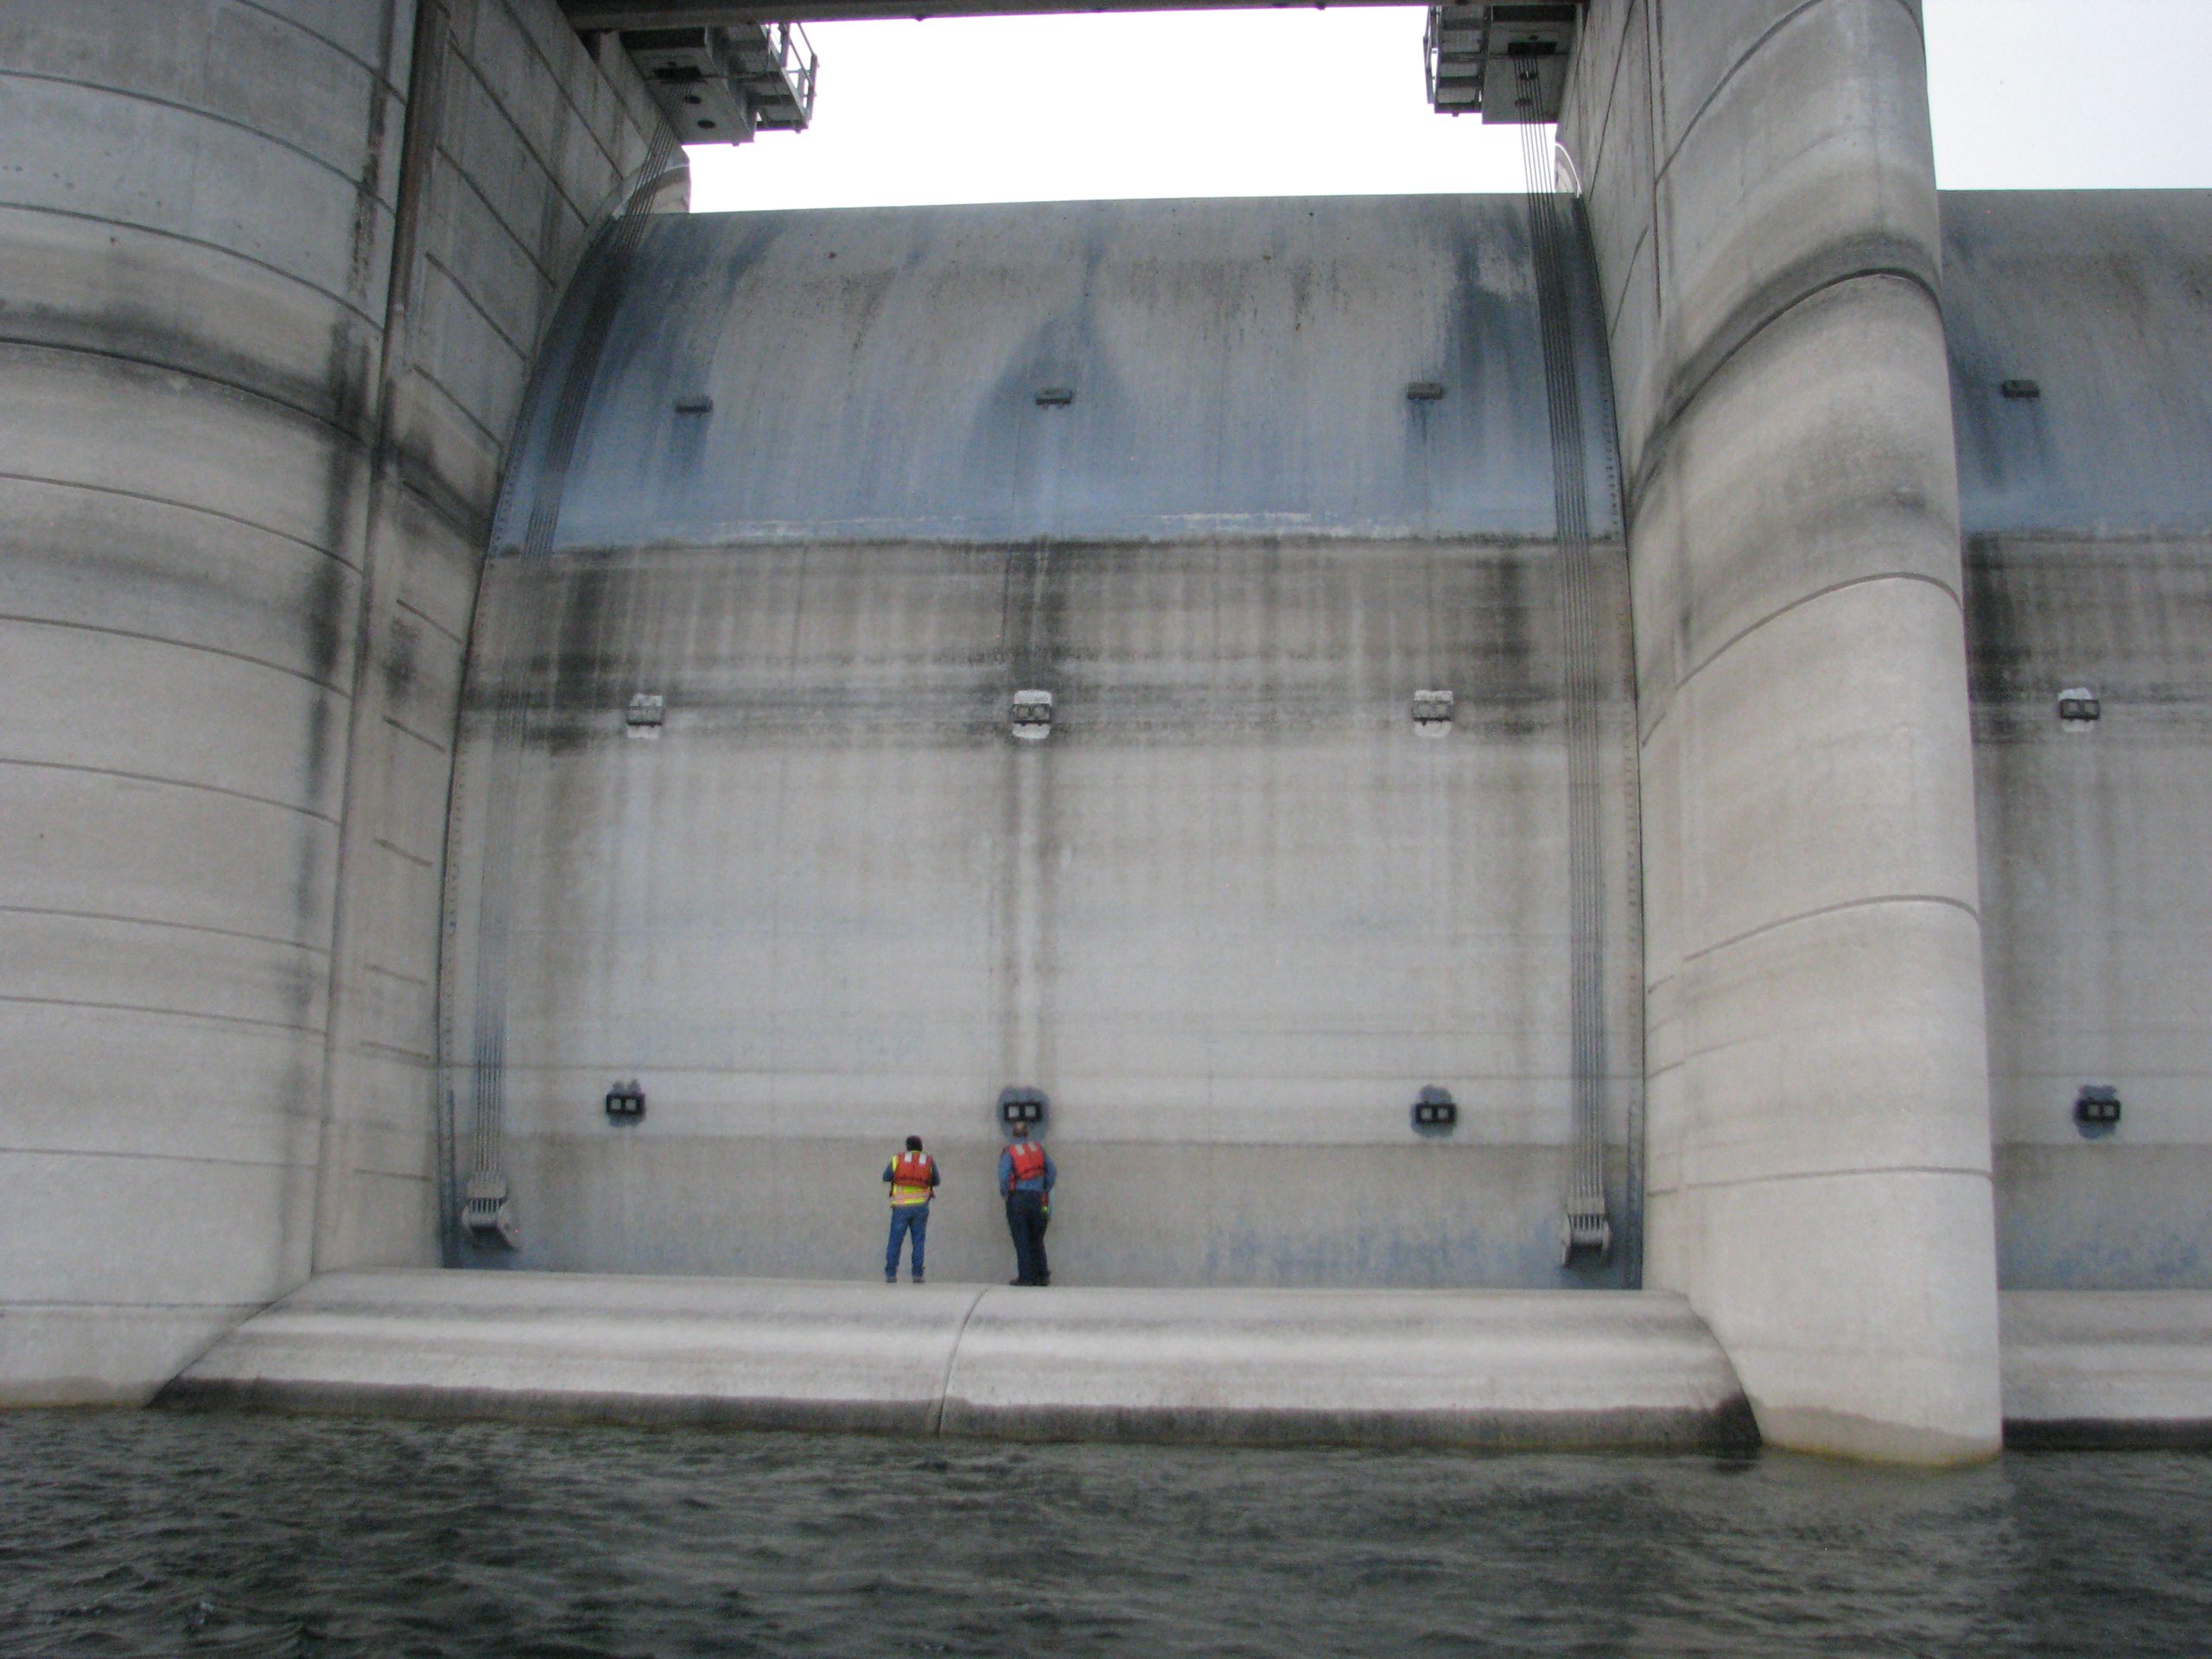 Fifty two foot tainter gates on Amistad Dam viewed from reservoir in 2014